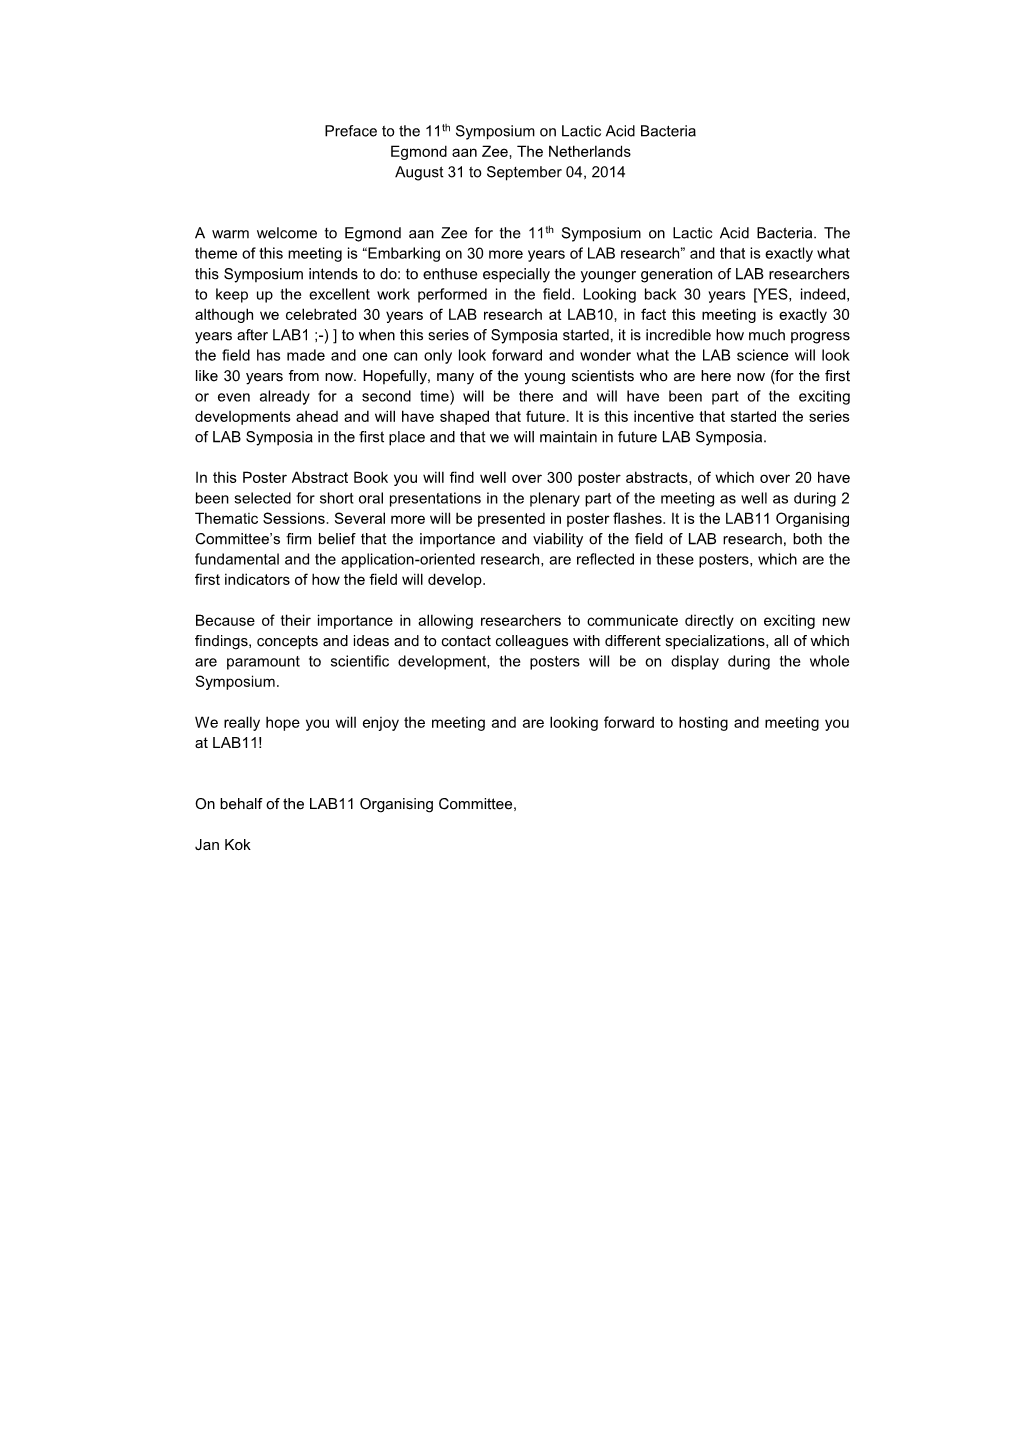 Preface to the 11Th Symposium on Lactic Acid Bacteria Egmond Aan Zee, the Netherlands August 31 to September 04, 2014